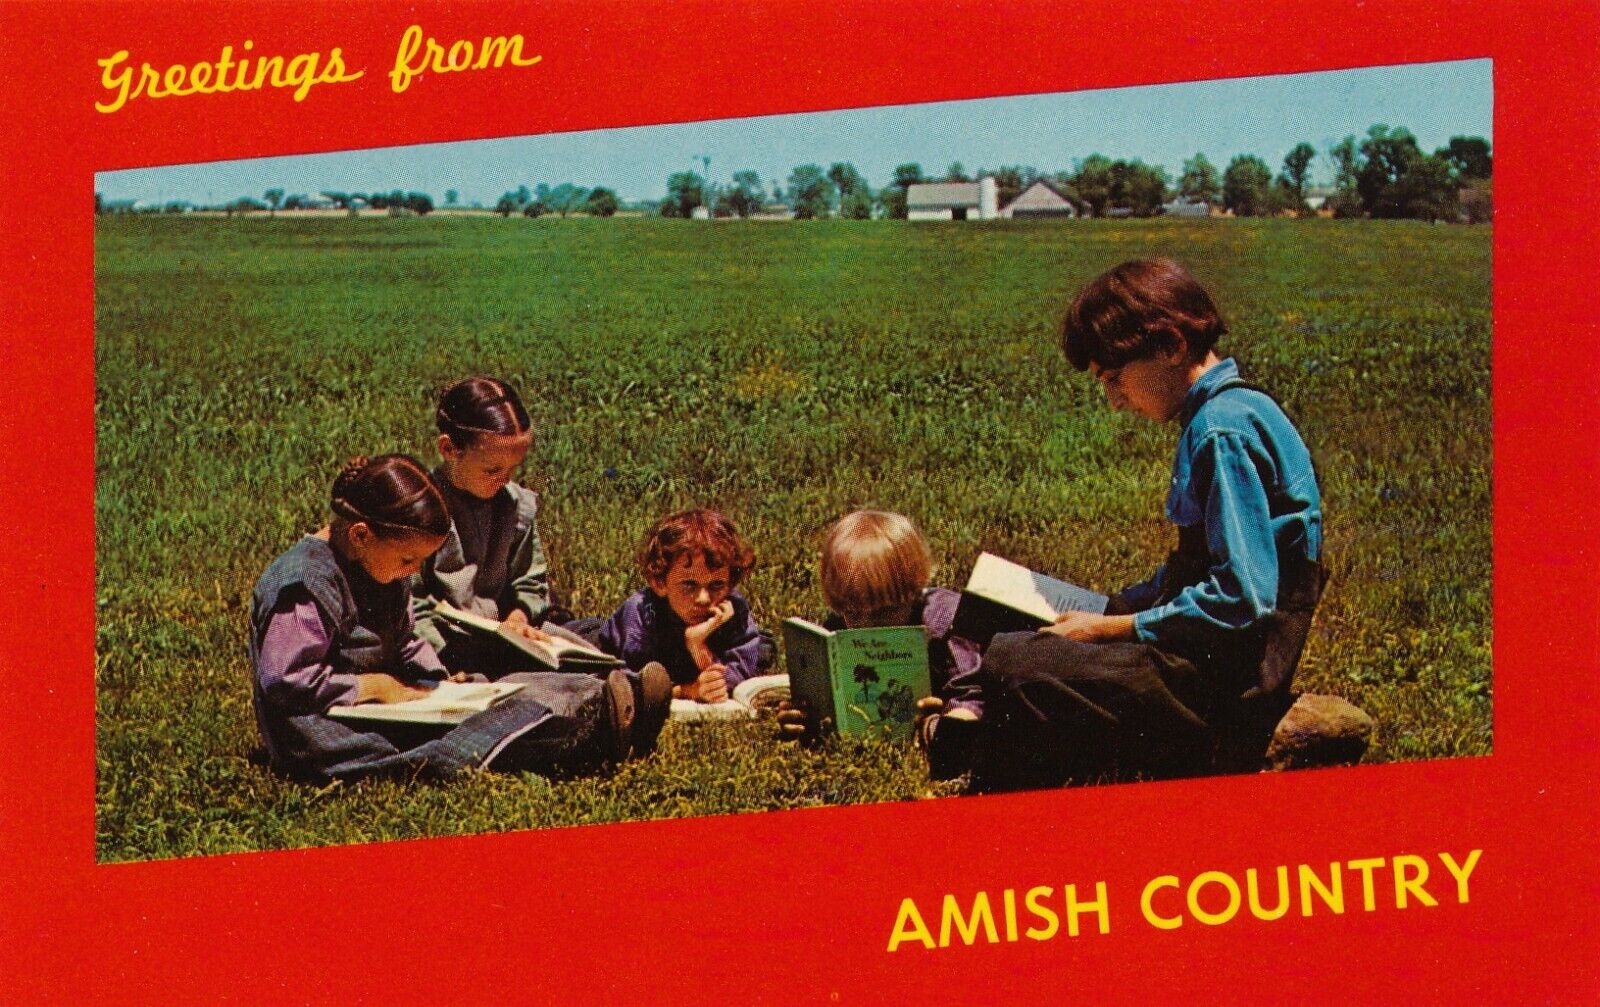 Greetings from Amish Country Children in Pennsylvania vintage unposted postcard